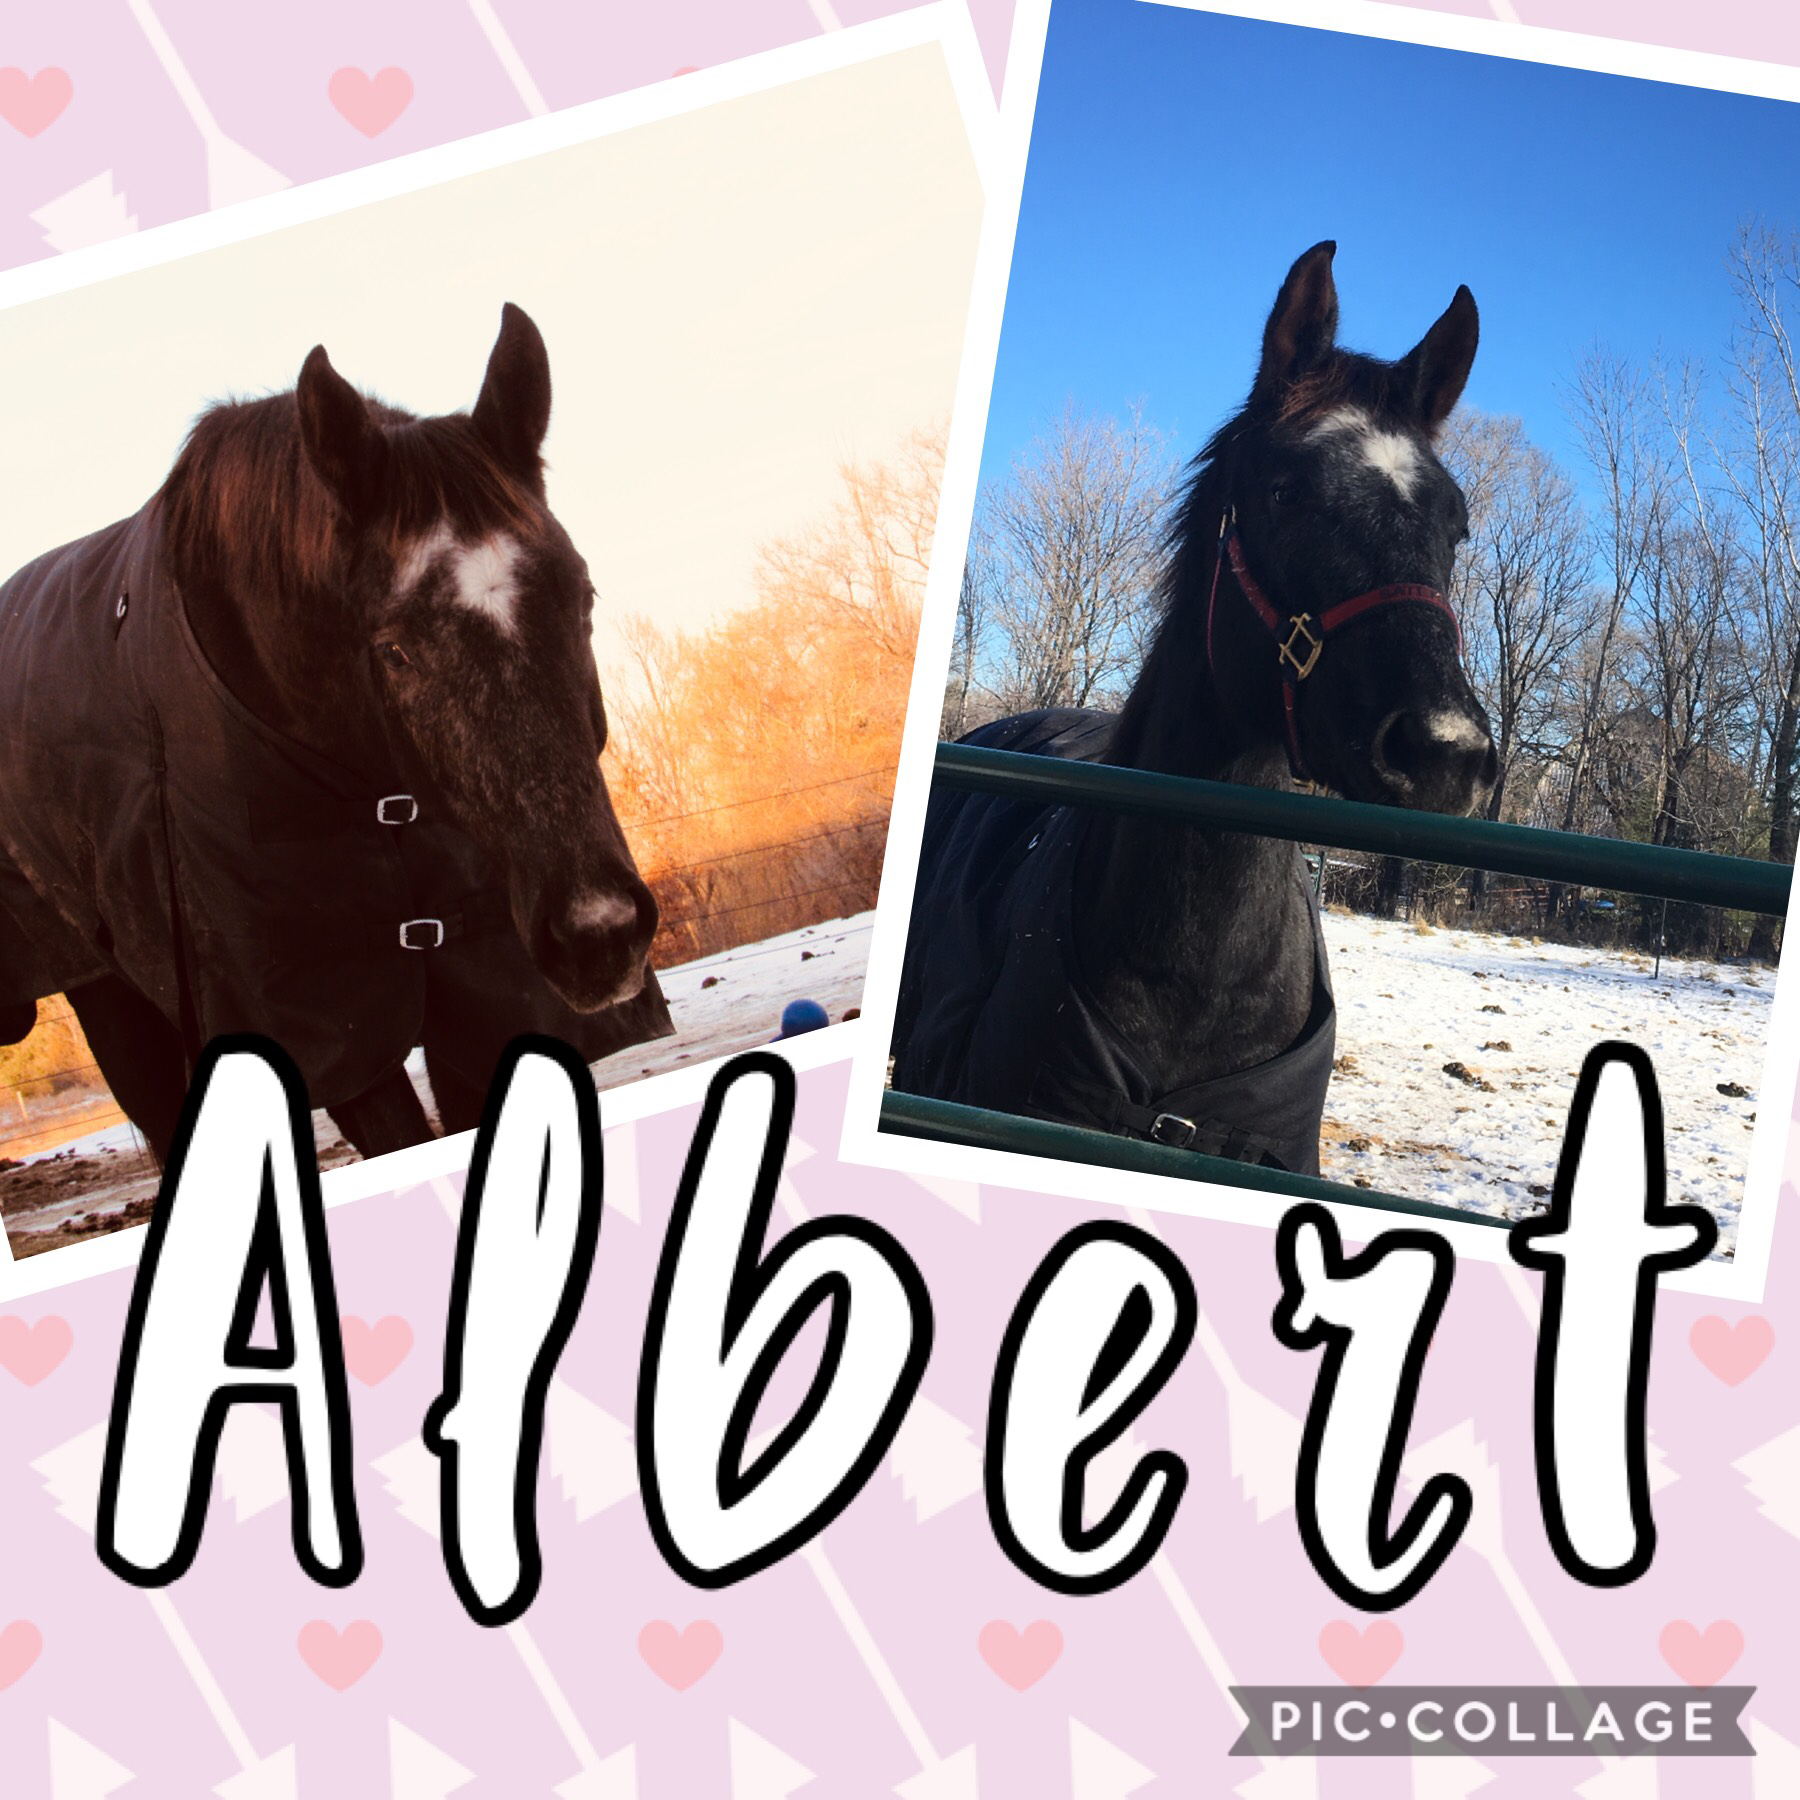 Albert is one of our parent’s horses! He is very playful, and he and Woody are best buds 😂 ( Palmer, our dog loves playing with them too)! He’s going to his first show this year!